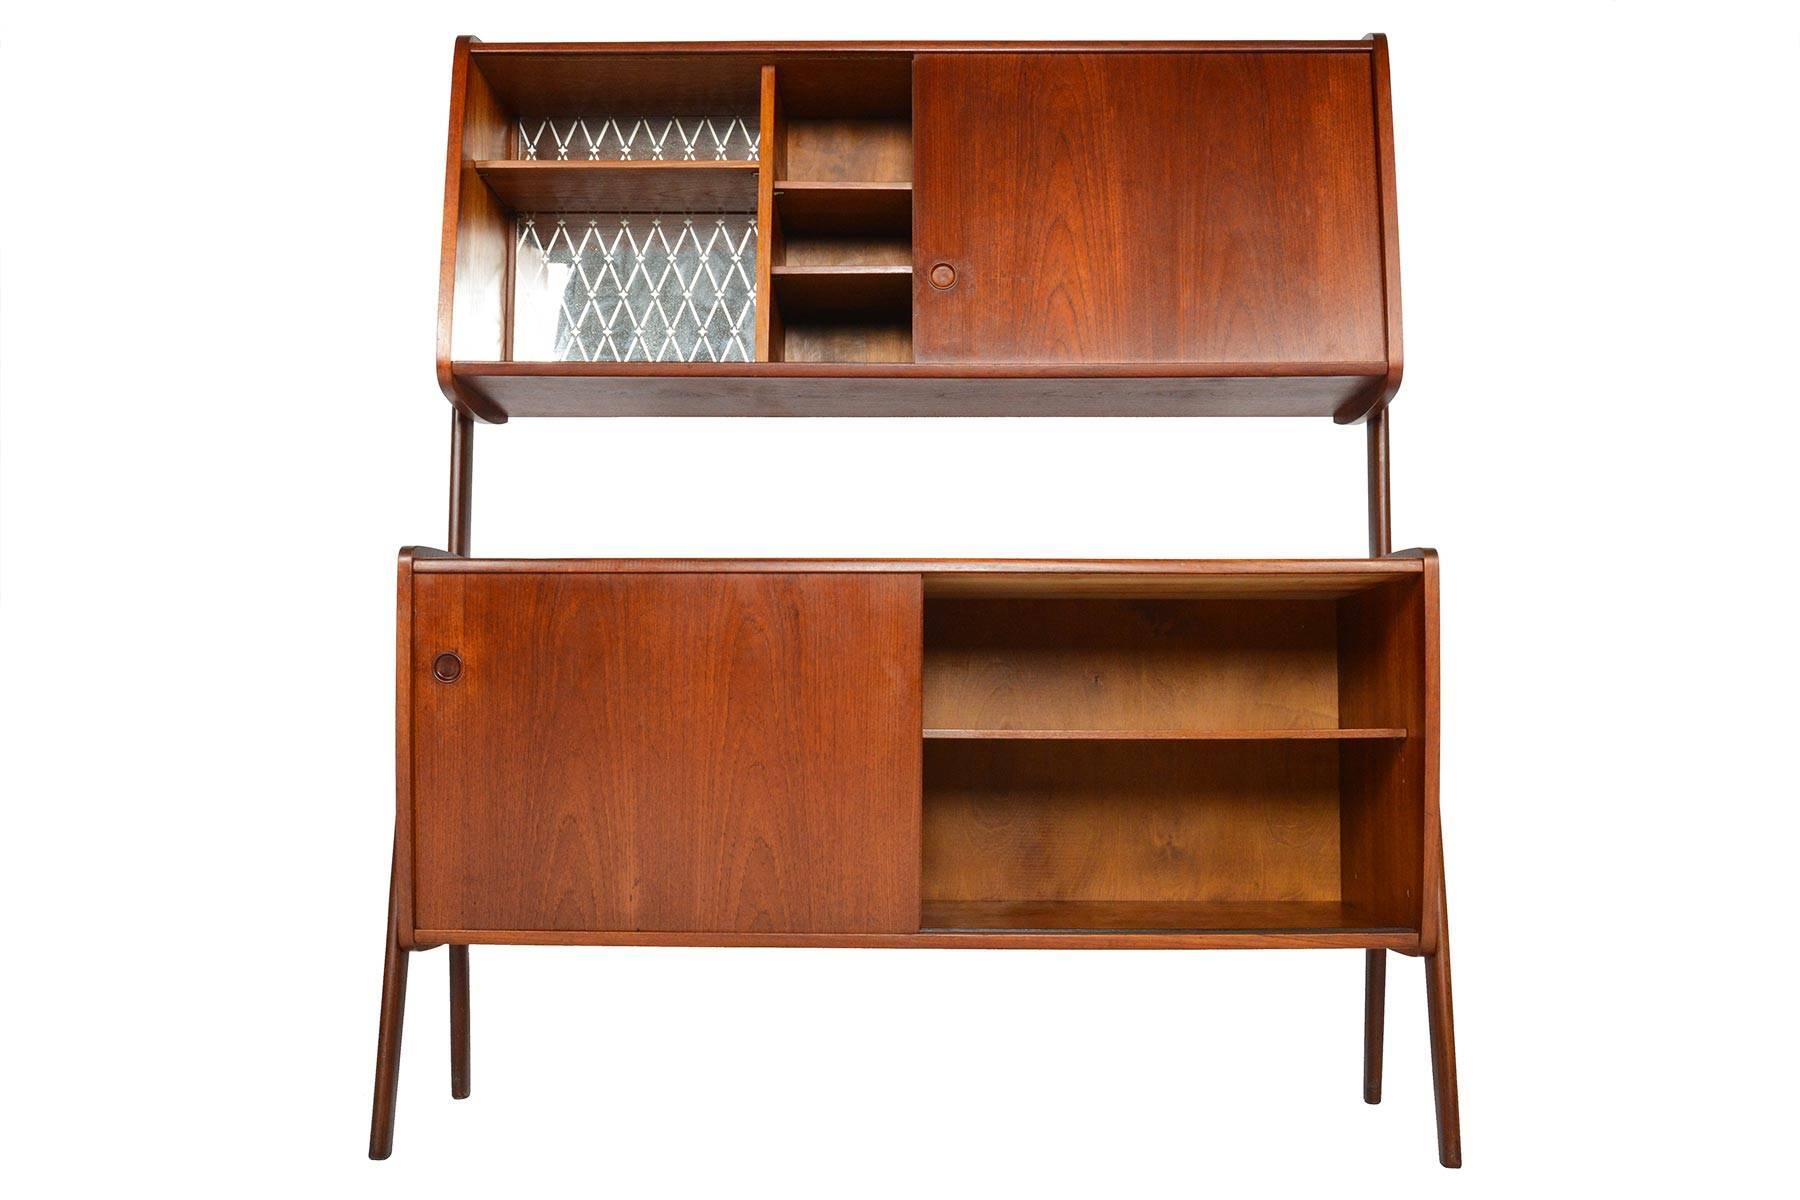 This wonderful Danish modern teak credenza with hutch offers two tiers of storage with a wonderfully airy design! The top hutch features a mirror lined bar and an open storage bay with two adjustable shelves. Beautiful exterior legs form the brace